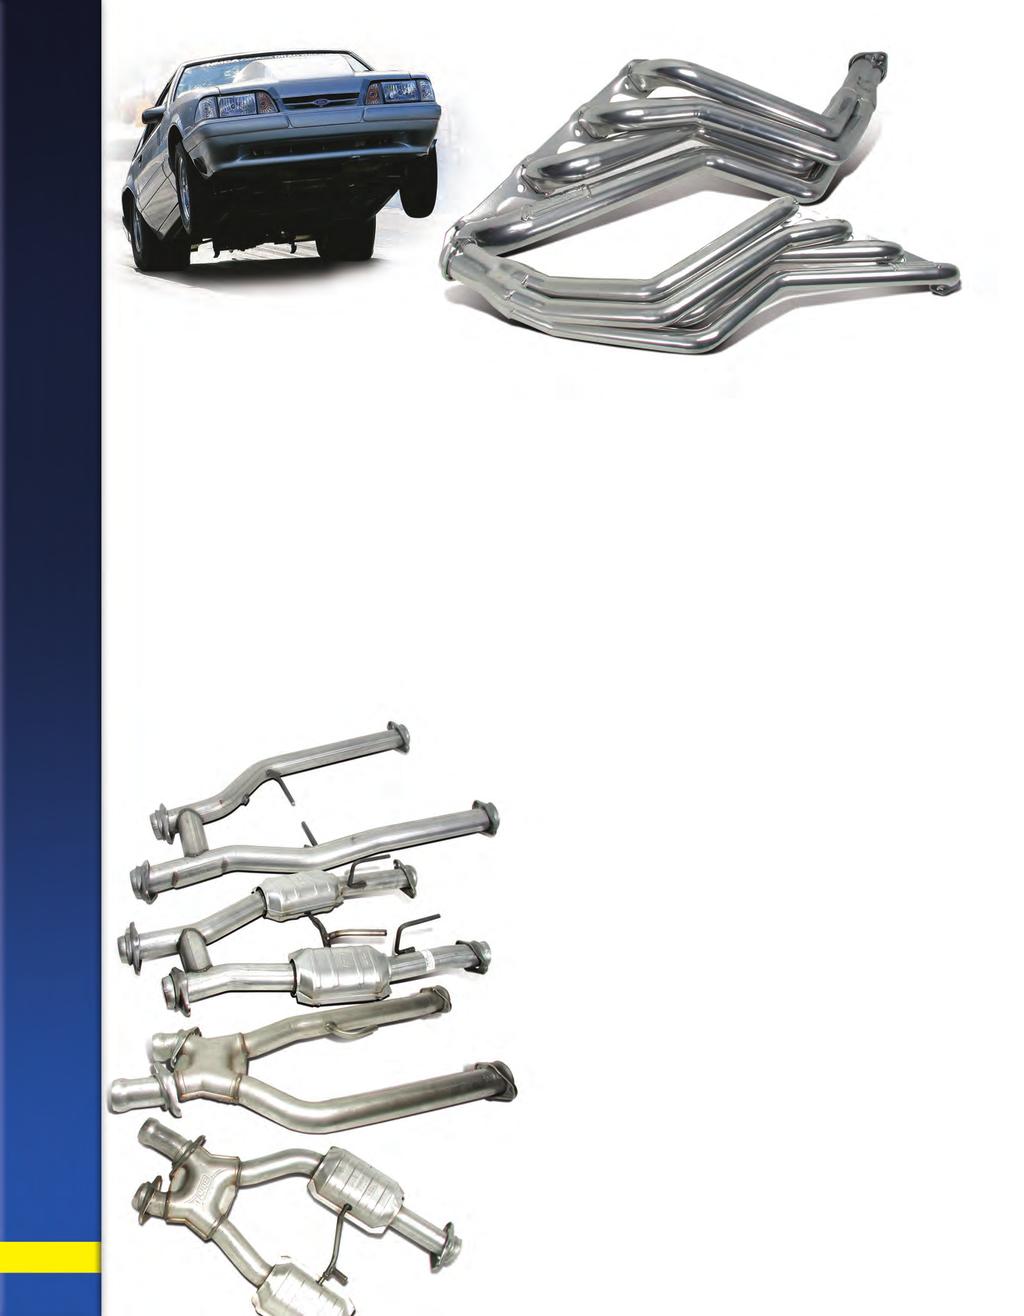 FORD PERFORMANCE EXHAUST 1979 95 LONG TUBE HEADERS CHECK OUT ONLINE VIDEO DIRECT BOLT ON, MATCHING MID-PIPES BELOW BOLT-ON 20 30 HORSEPOWER AVAILALE IN CHROME OR POLISHED CERAMIC Available in both